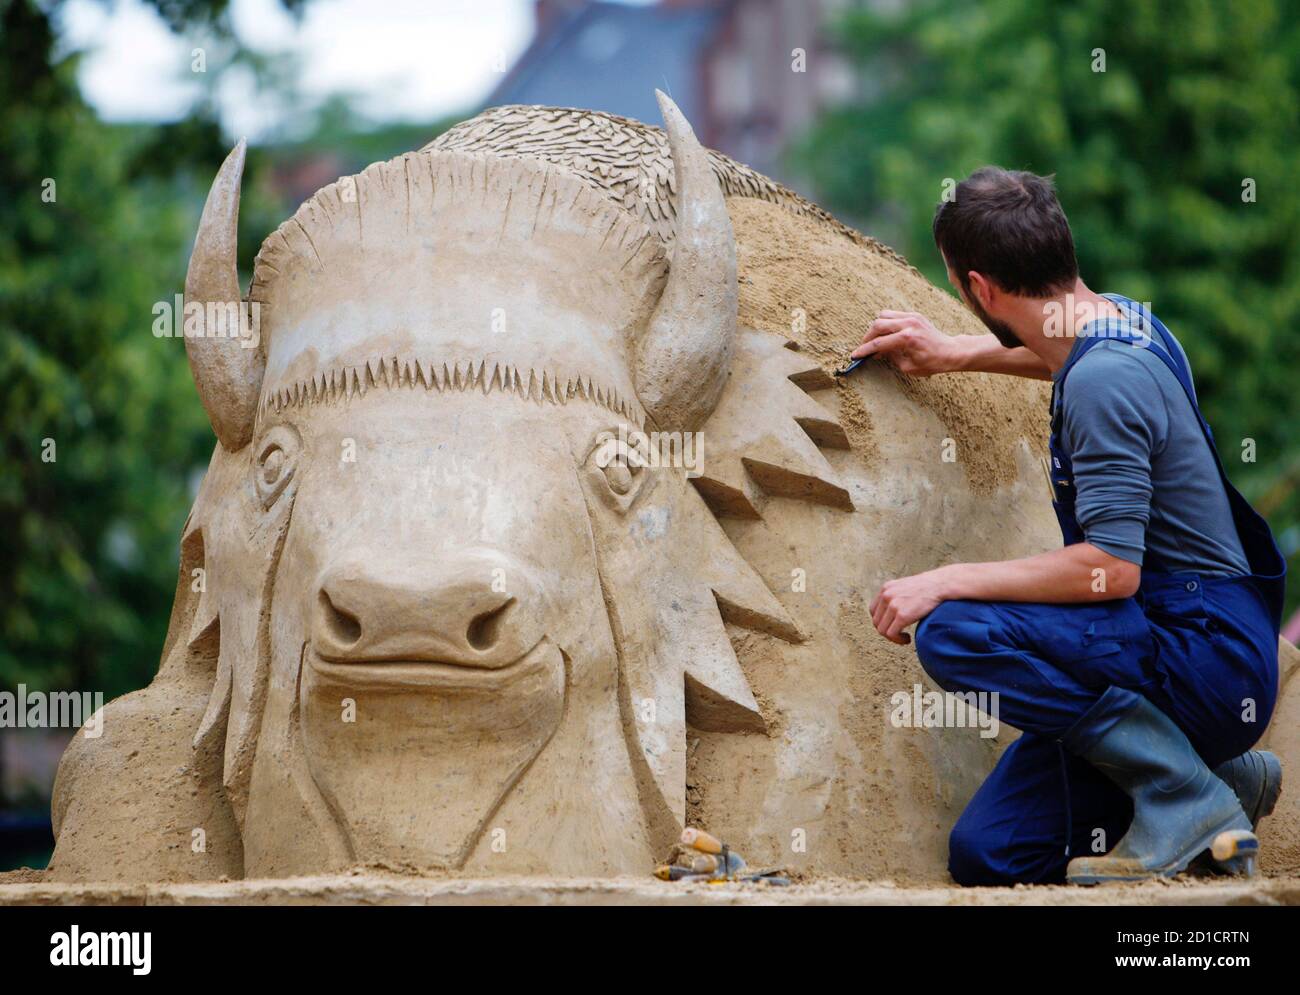 An artist works on a sand sculpture at the seventh international sand sculptures festival 'Sandsation' in Berlin June 6, 2009. Twelve sculptures of up to 4.5 metres in height, each one constructed as an imaginary urban world, will enter the competition for the world champion title in sand sculpture construction. With an 8 metres high show piece the artists will also take a joint look into the future ? ?Berlin in the year 2222? is the theme for this collectively created sculpture.The festival will open its doors to the public on June 7 till August 30 near Berlin Hauptbahnhof (central station).  Stock Photo